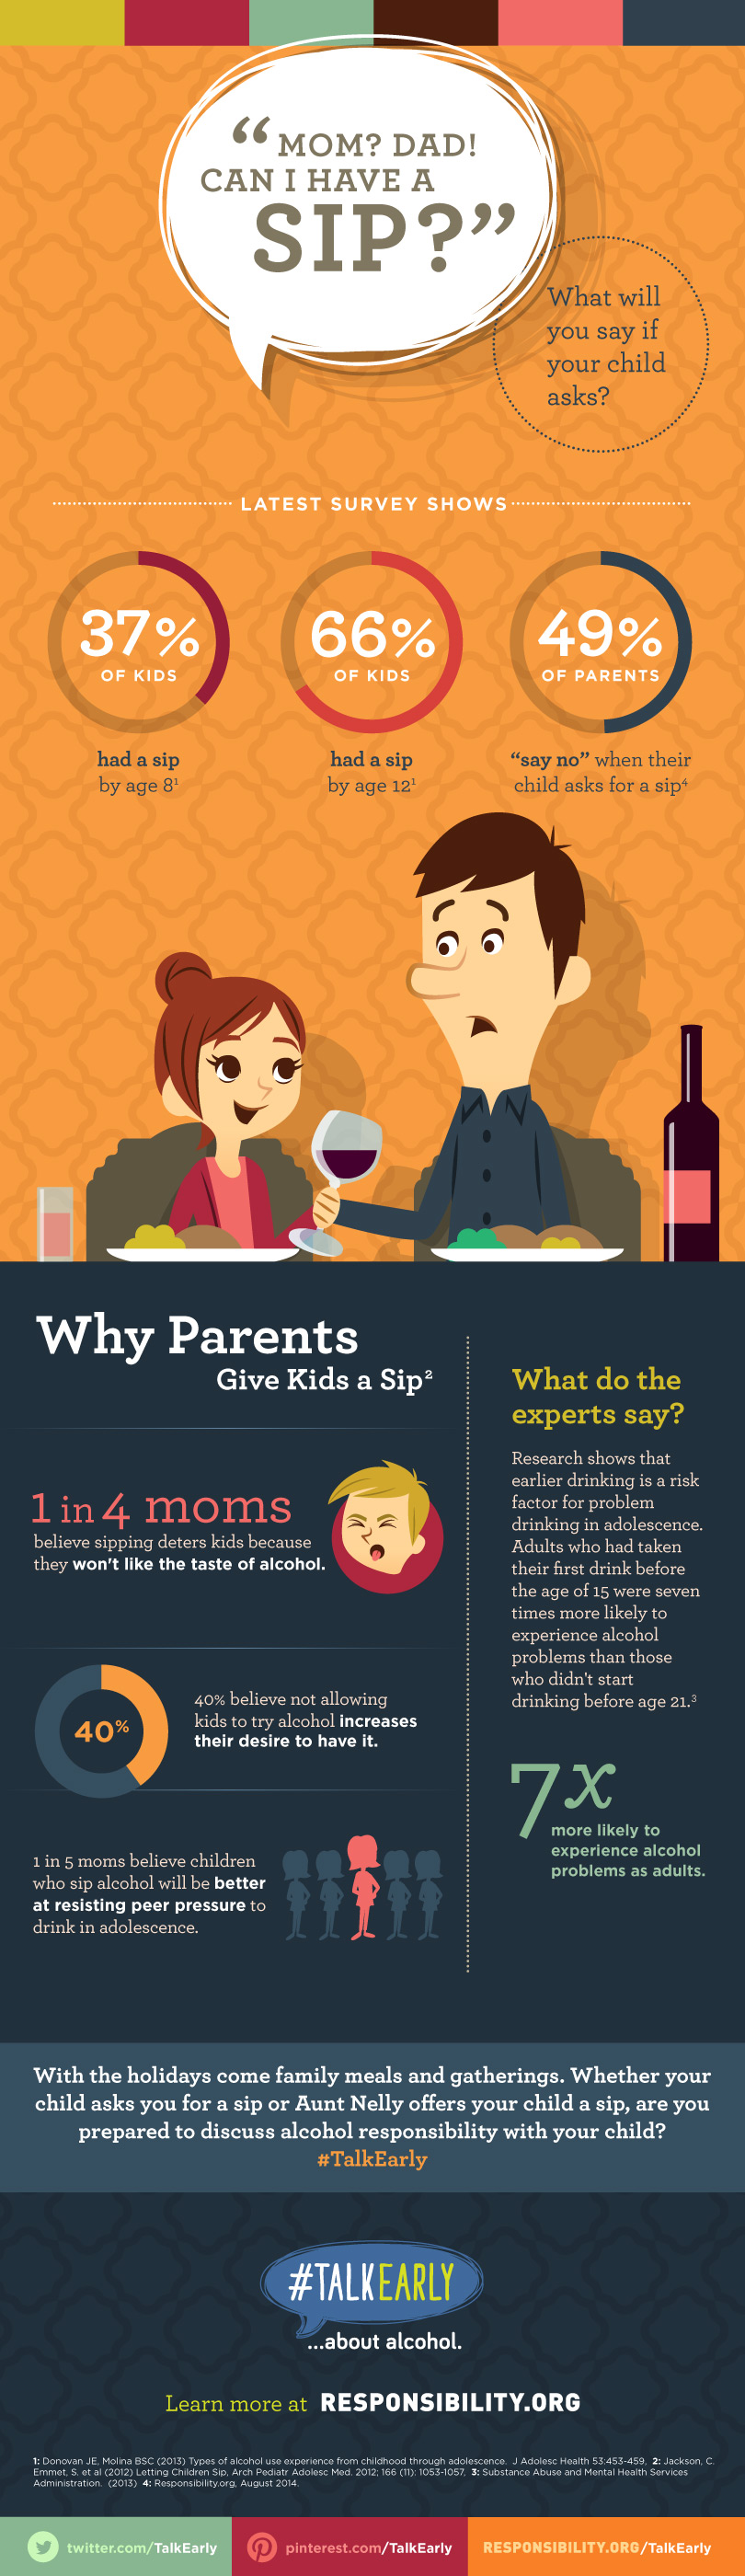 Parenting can be hard, especially when kids have questions like "Can I Take a Sip?" pop up. This is a great teachable moment, but you can choose when to teach. Kids ask lots of questions, not all of them need immediate answers.